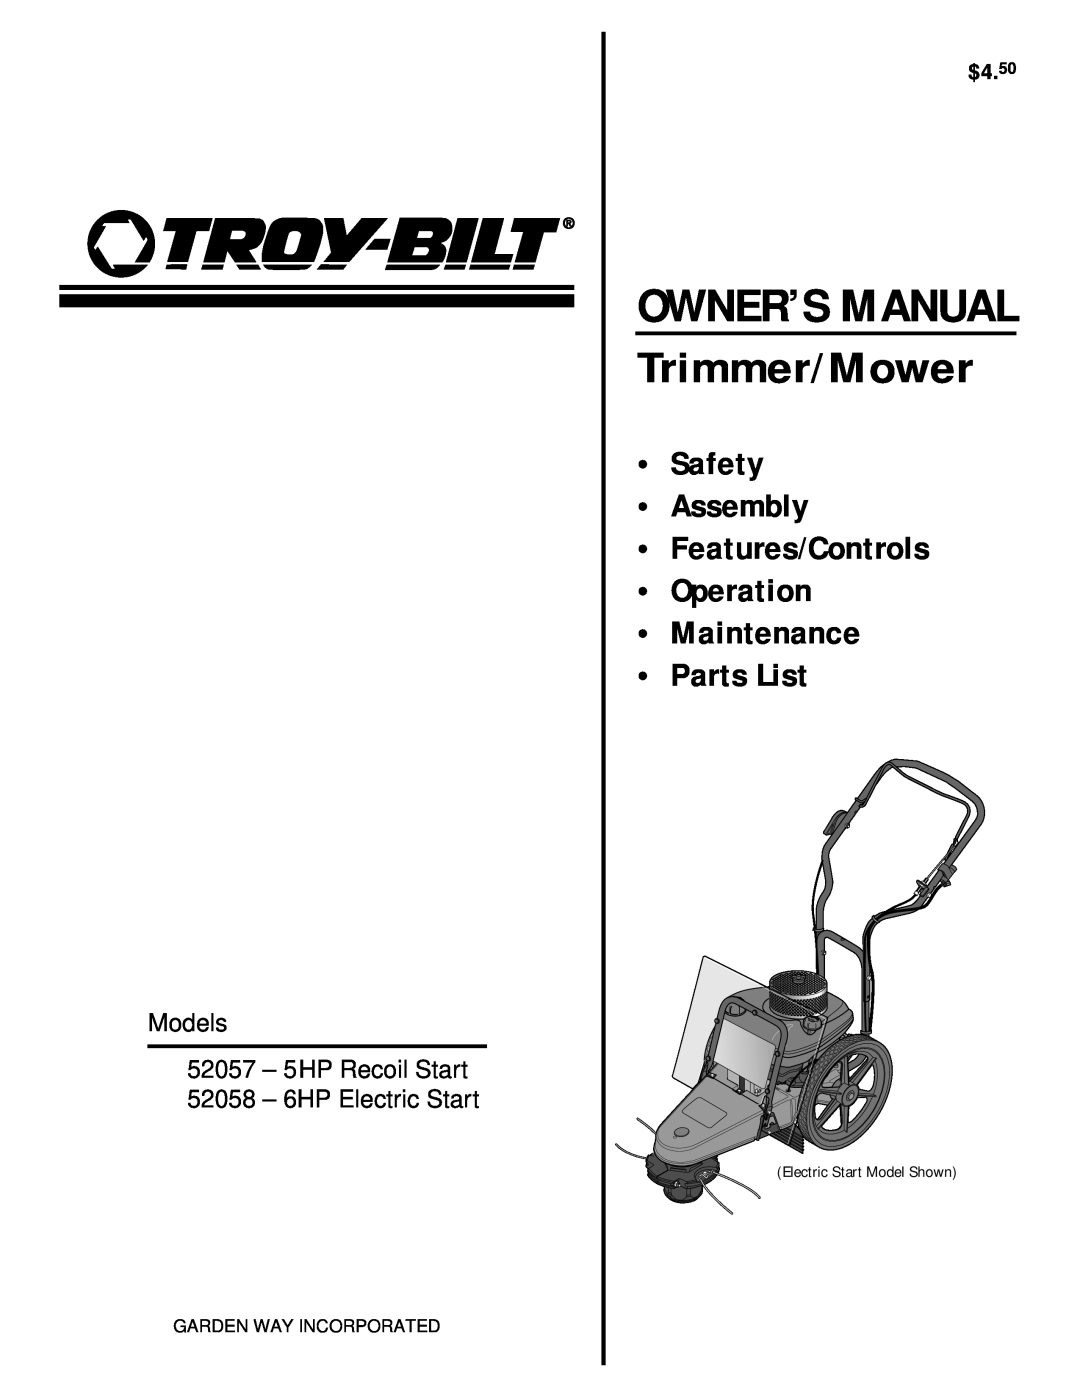 Troy-Bilt 52058 owner manual $4.50, Trimmer/Mower, Safety Assembly Features/Controls Operation Maintenance Parts List 